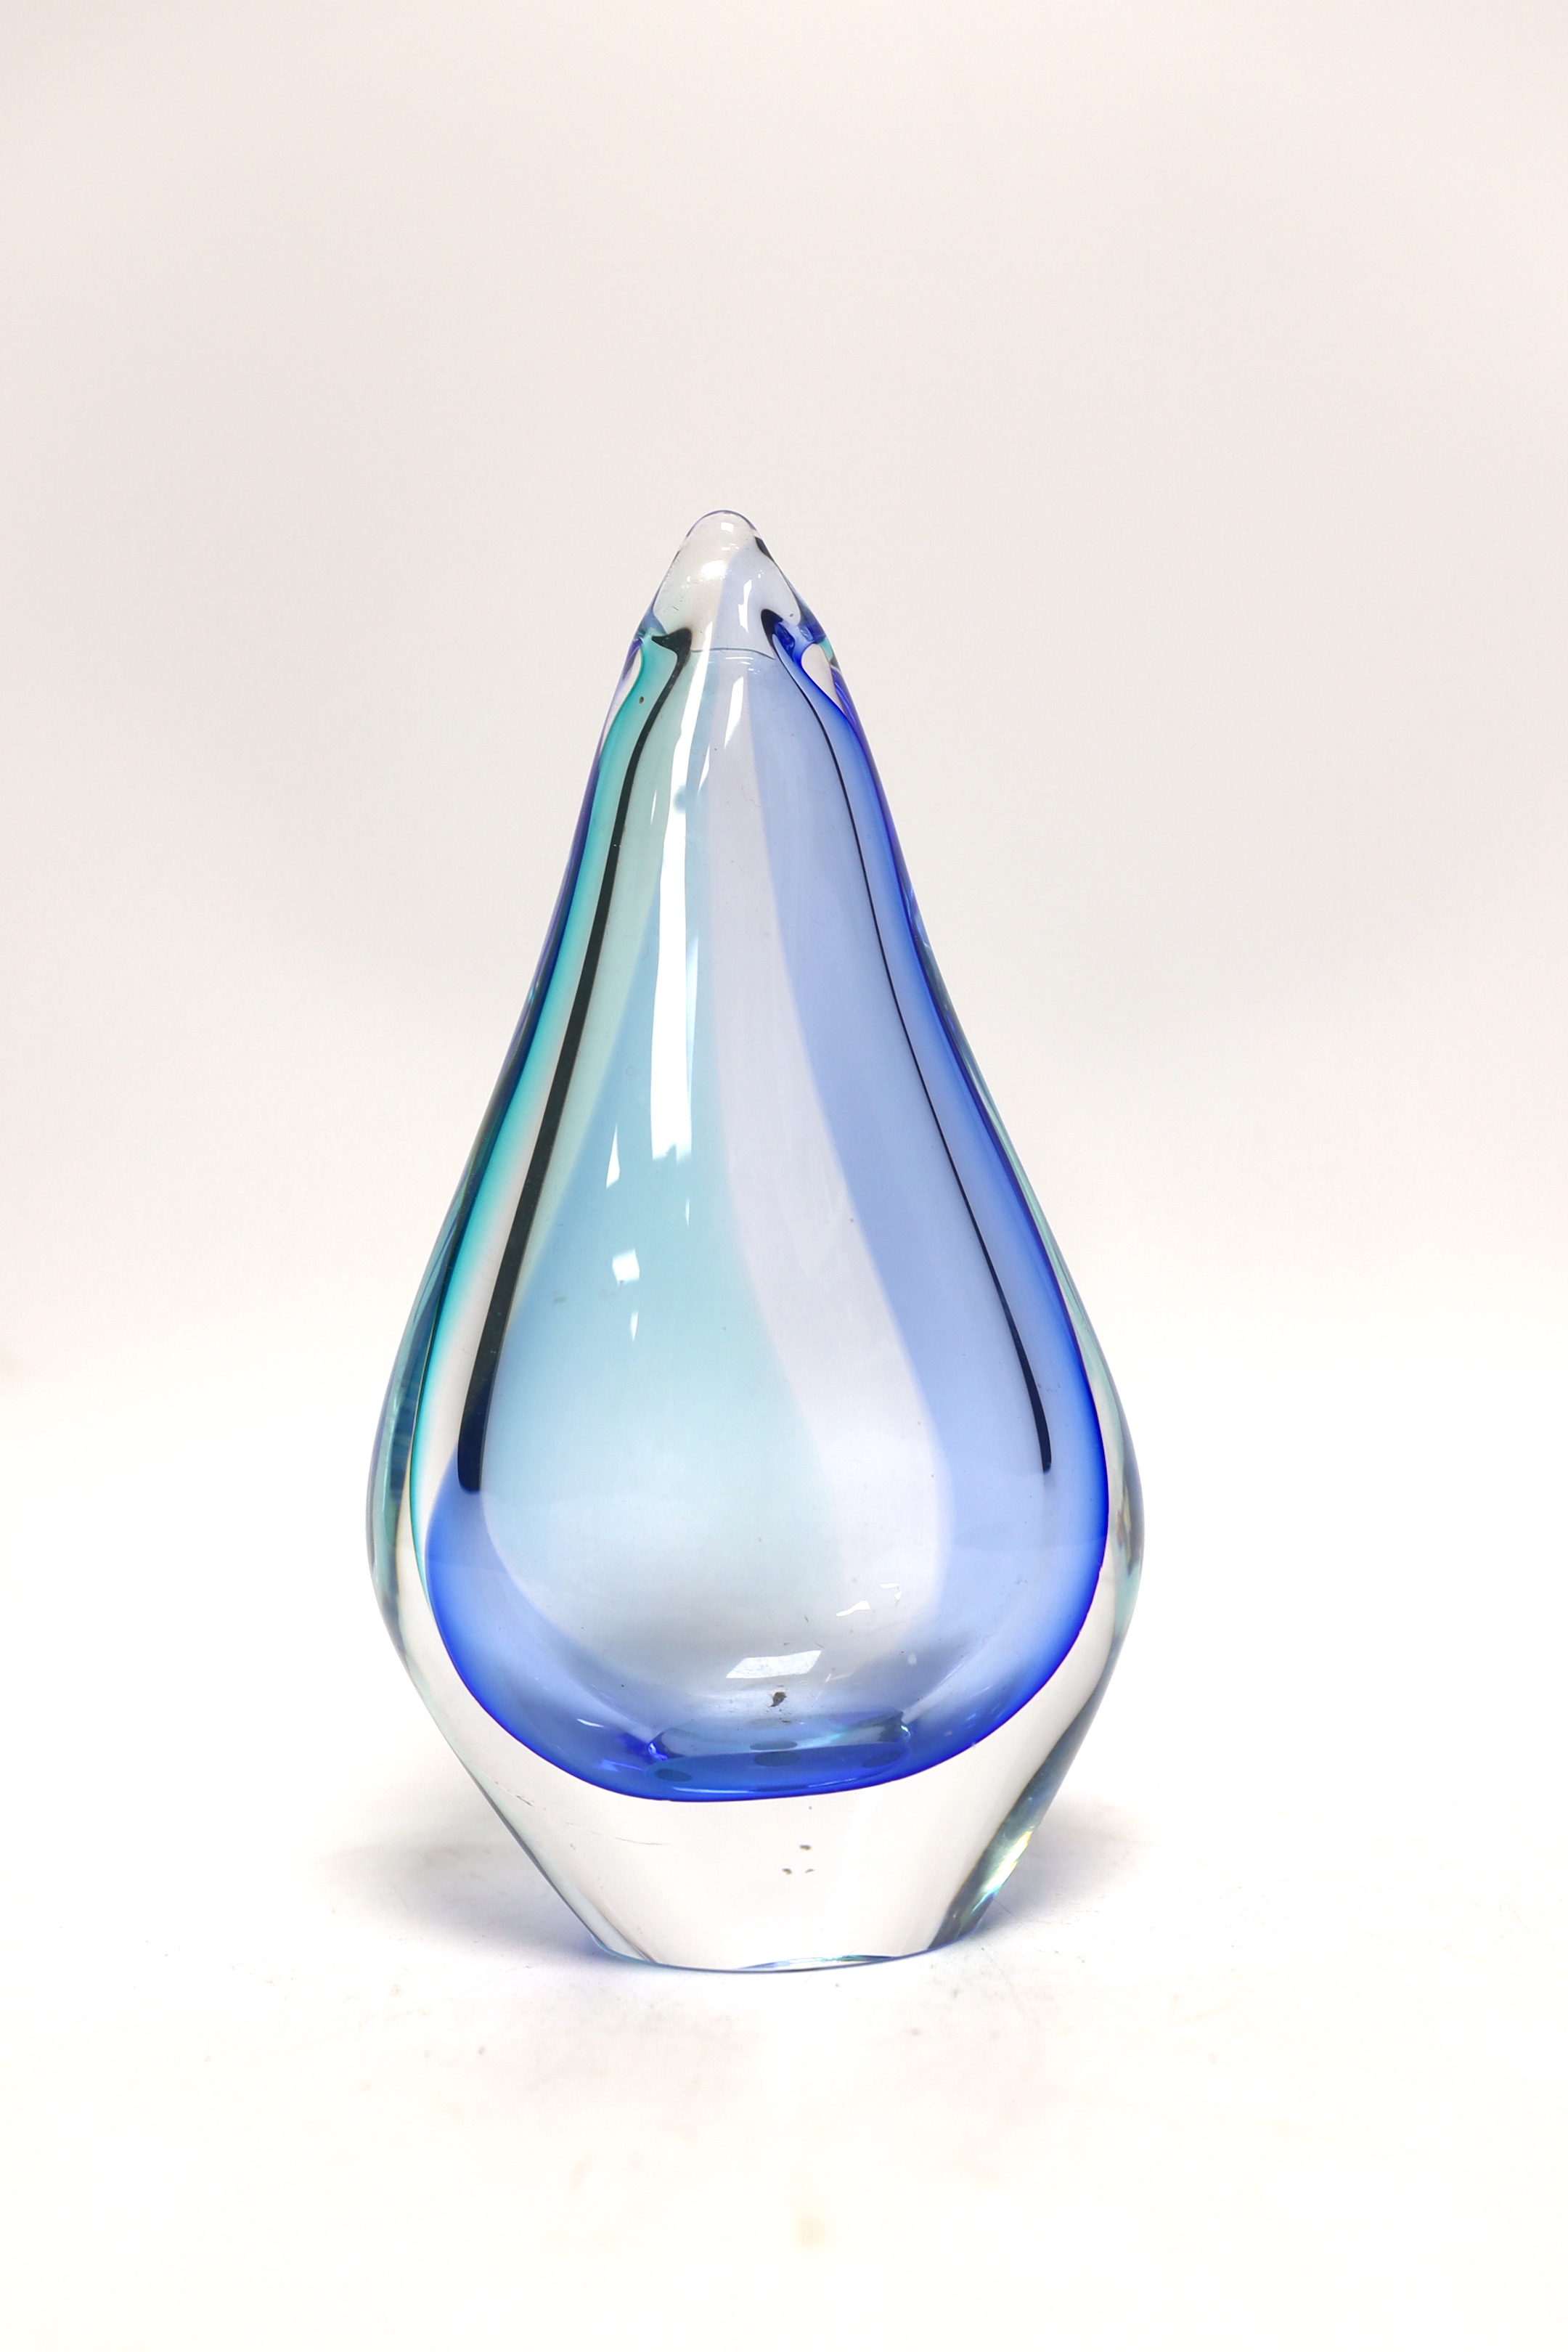 An art glass vase, possibly Murano, 15cm high